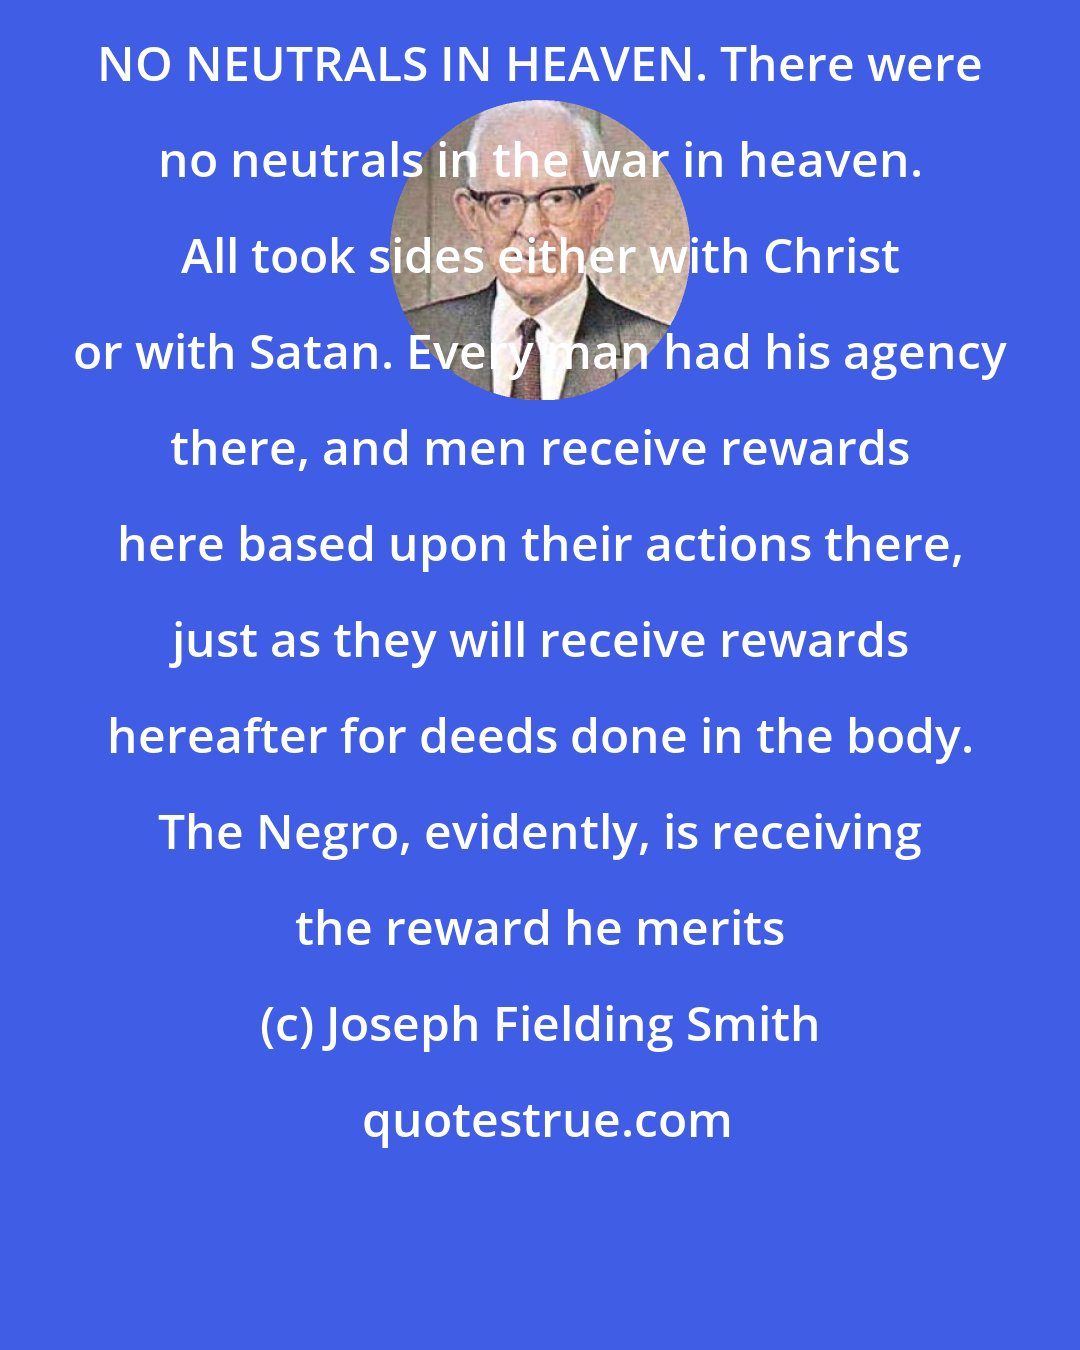 Joseph Fielding Smith: NO NEUTRALS IN HEAVEN. There were no neutrals in the war in heaven. All took sides either with Christ or with Satan. Every man had his agency there, and men receive rewards here based upon their actions there, just as they will receive rewards hereafter for deeds done in the body. The Negro, evidently, is receiving the reward he merits